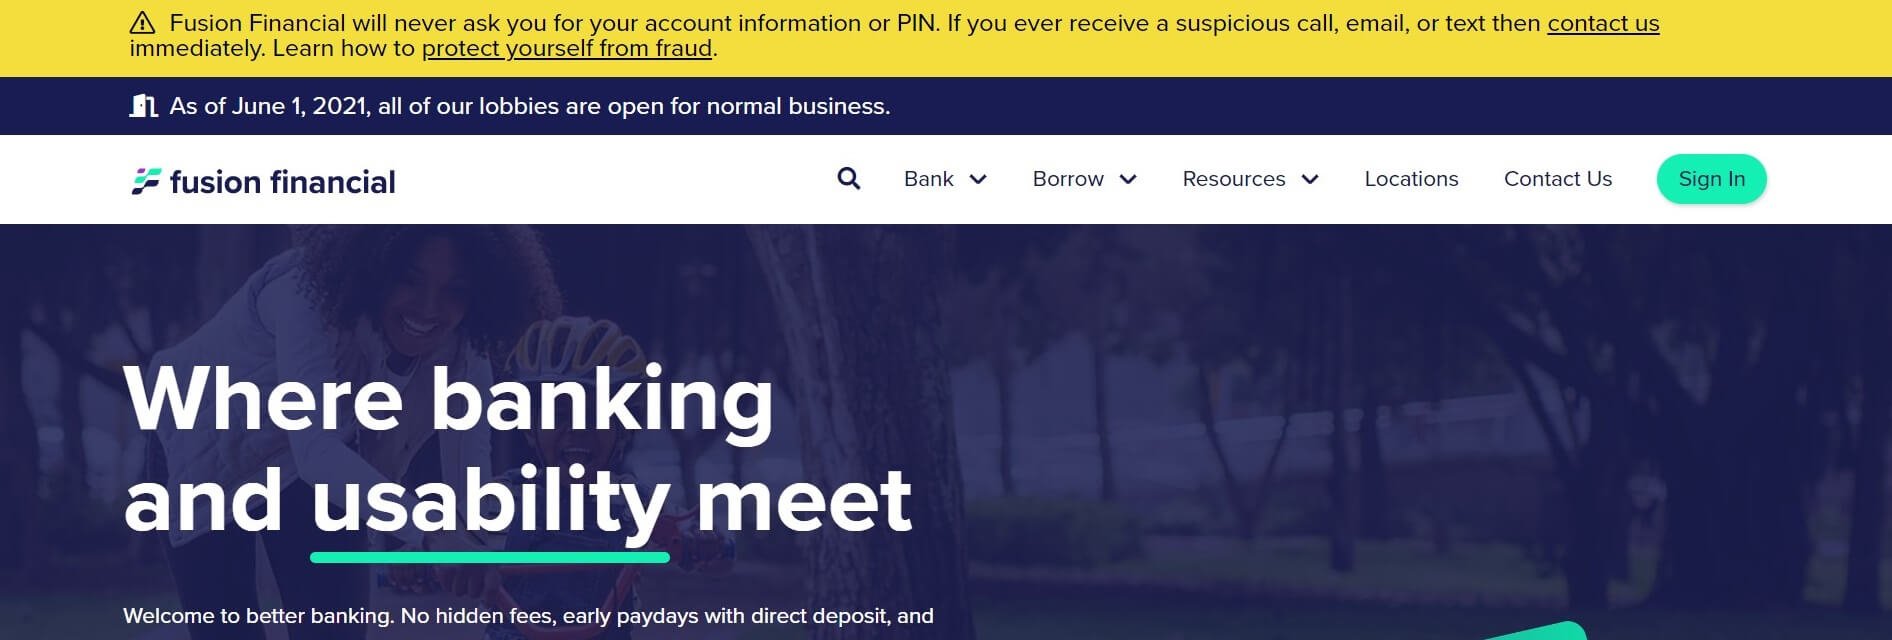 banner alert notification about website scams in banking